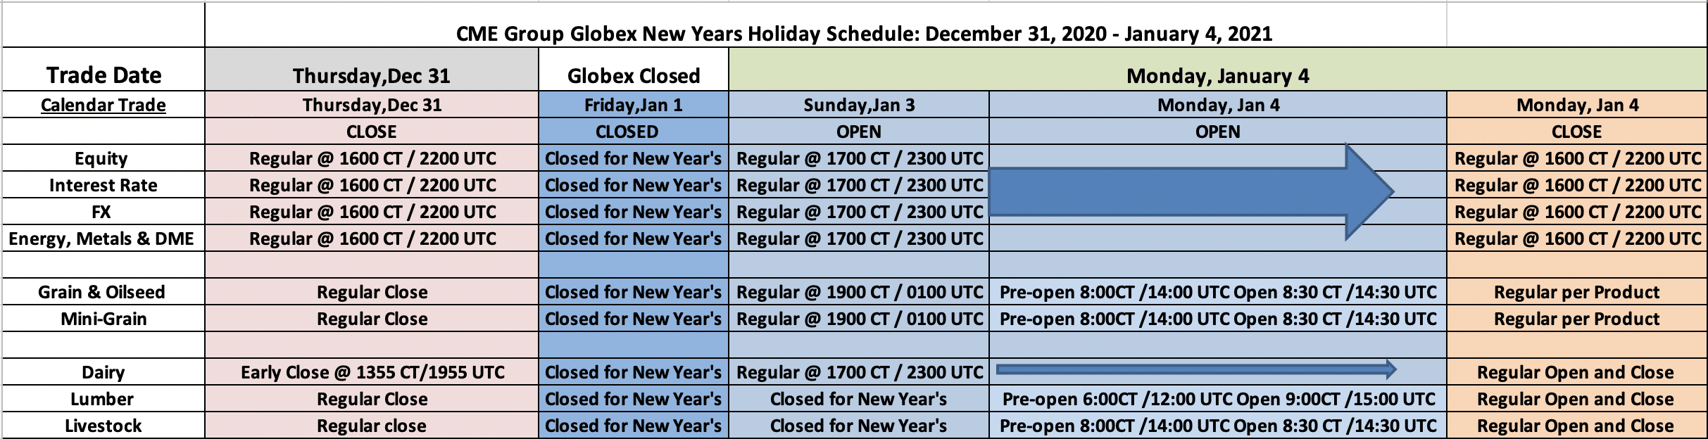 New Years - Holiday Trading Schedule (2020/2021)